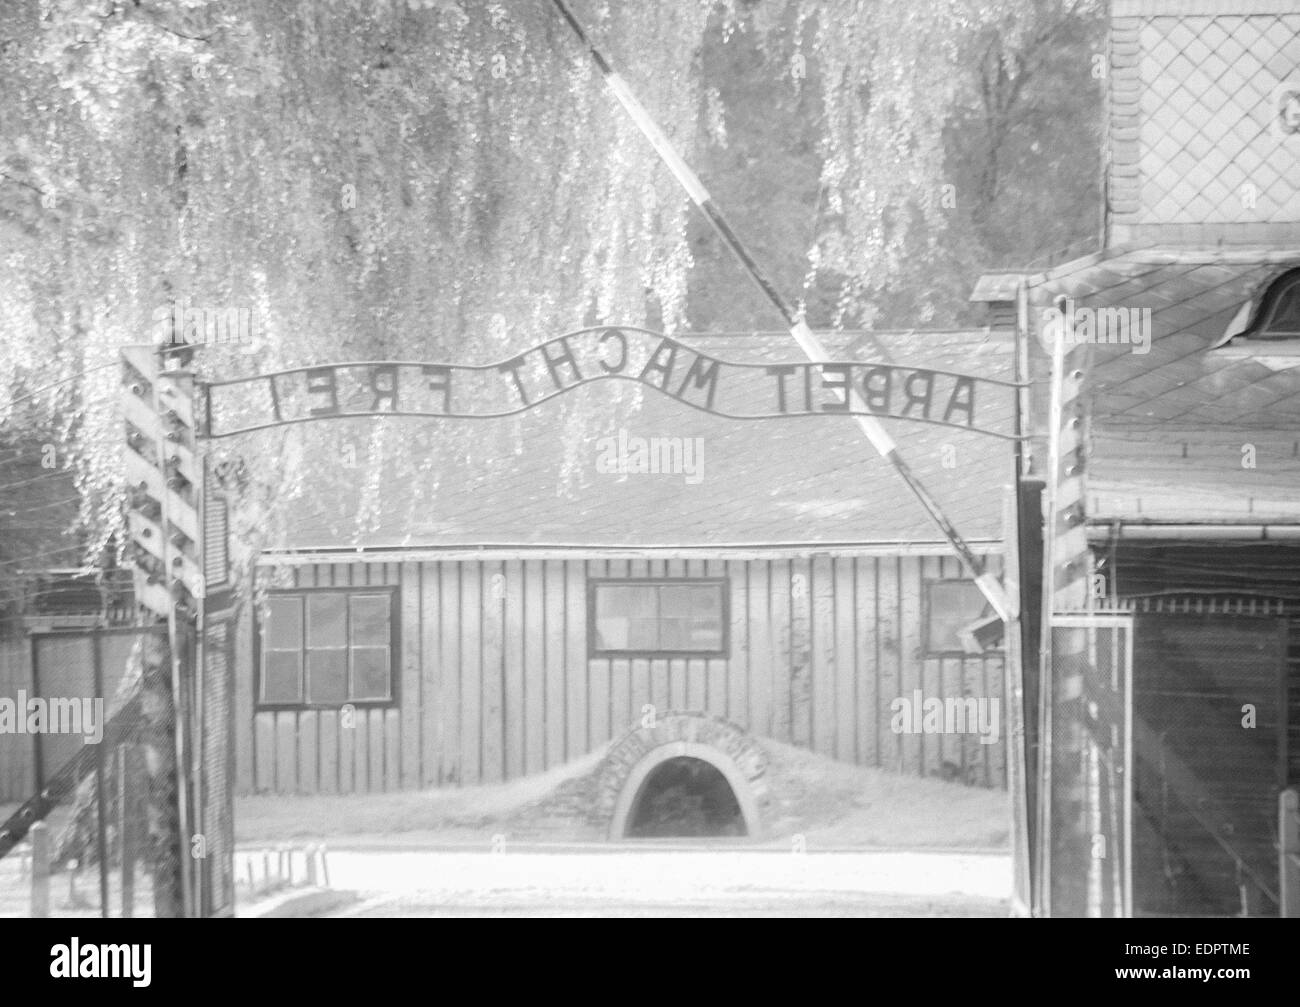 Arbeit Macht Frei - Work Makes You Free sign over entrance gate at the Auschwitz concentration camp, Auschwitz Poland - infrared Stock Photo